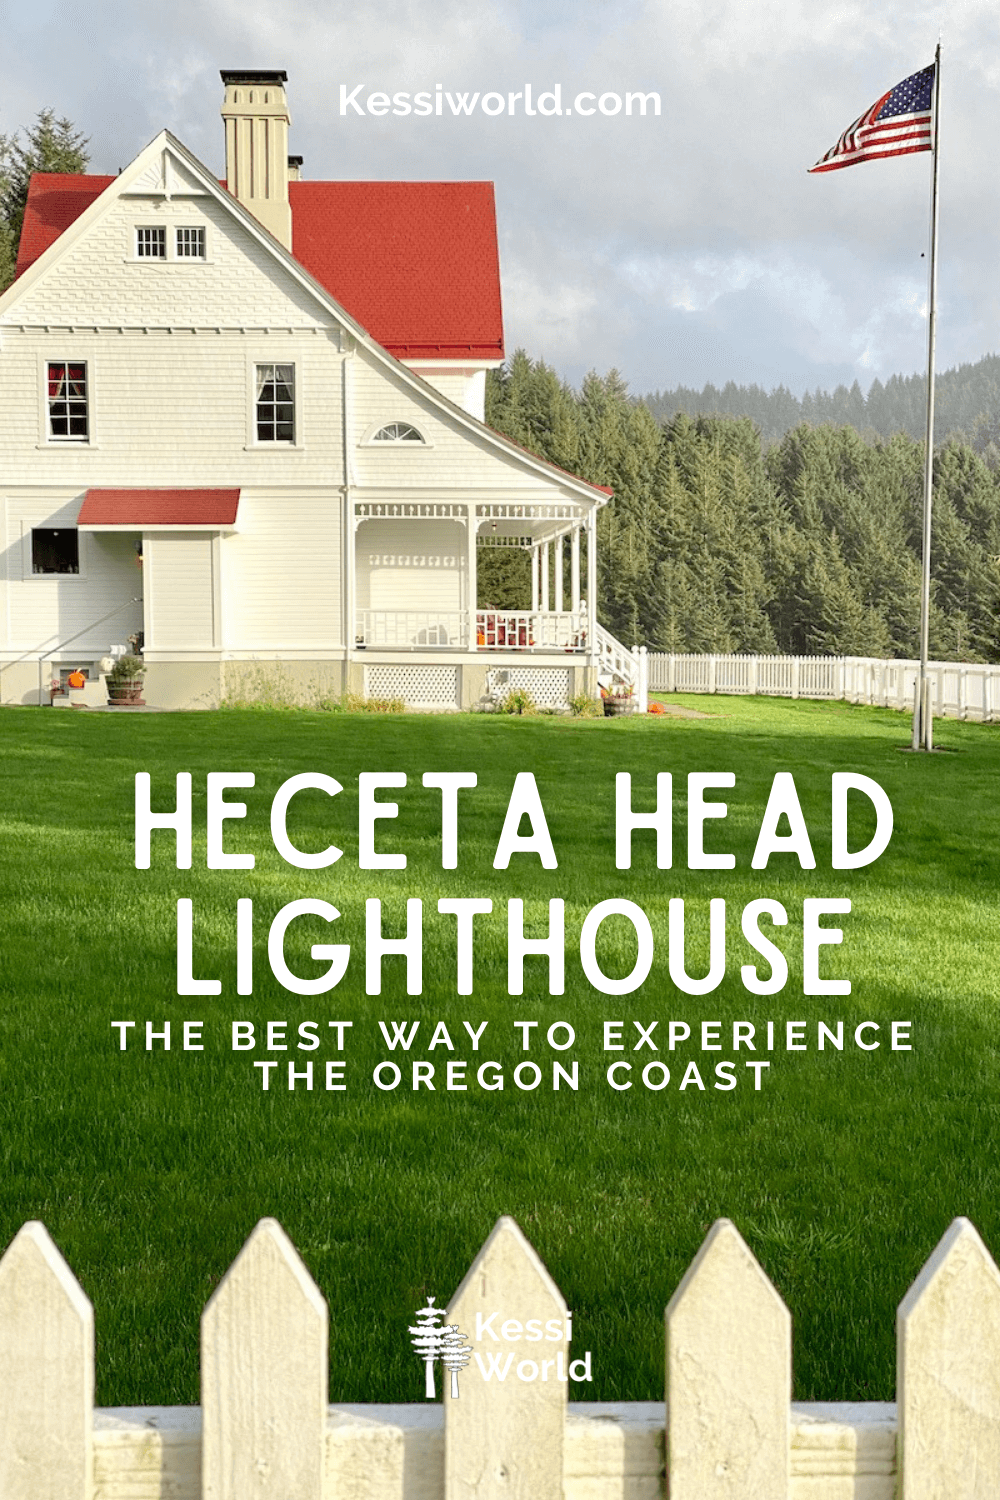 This Pinterest pin shows The Heceta Lighthouse Bed and Breakfast shines in the sunlight, along with an American flag flying in the green grass yard surrounded by a white picket fence.